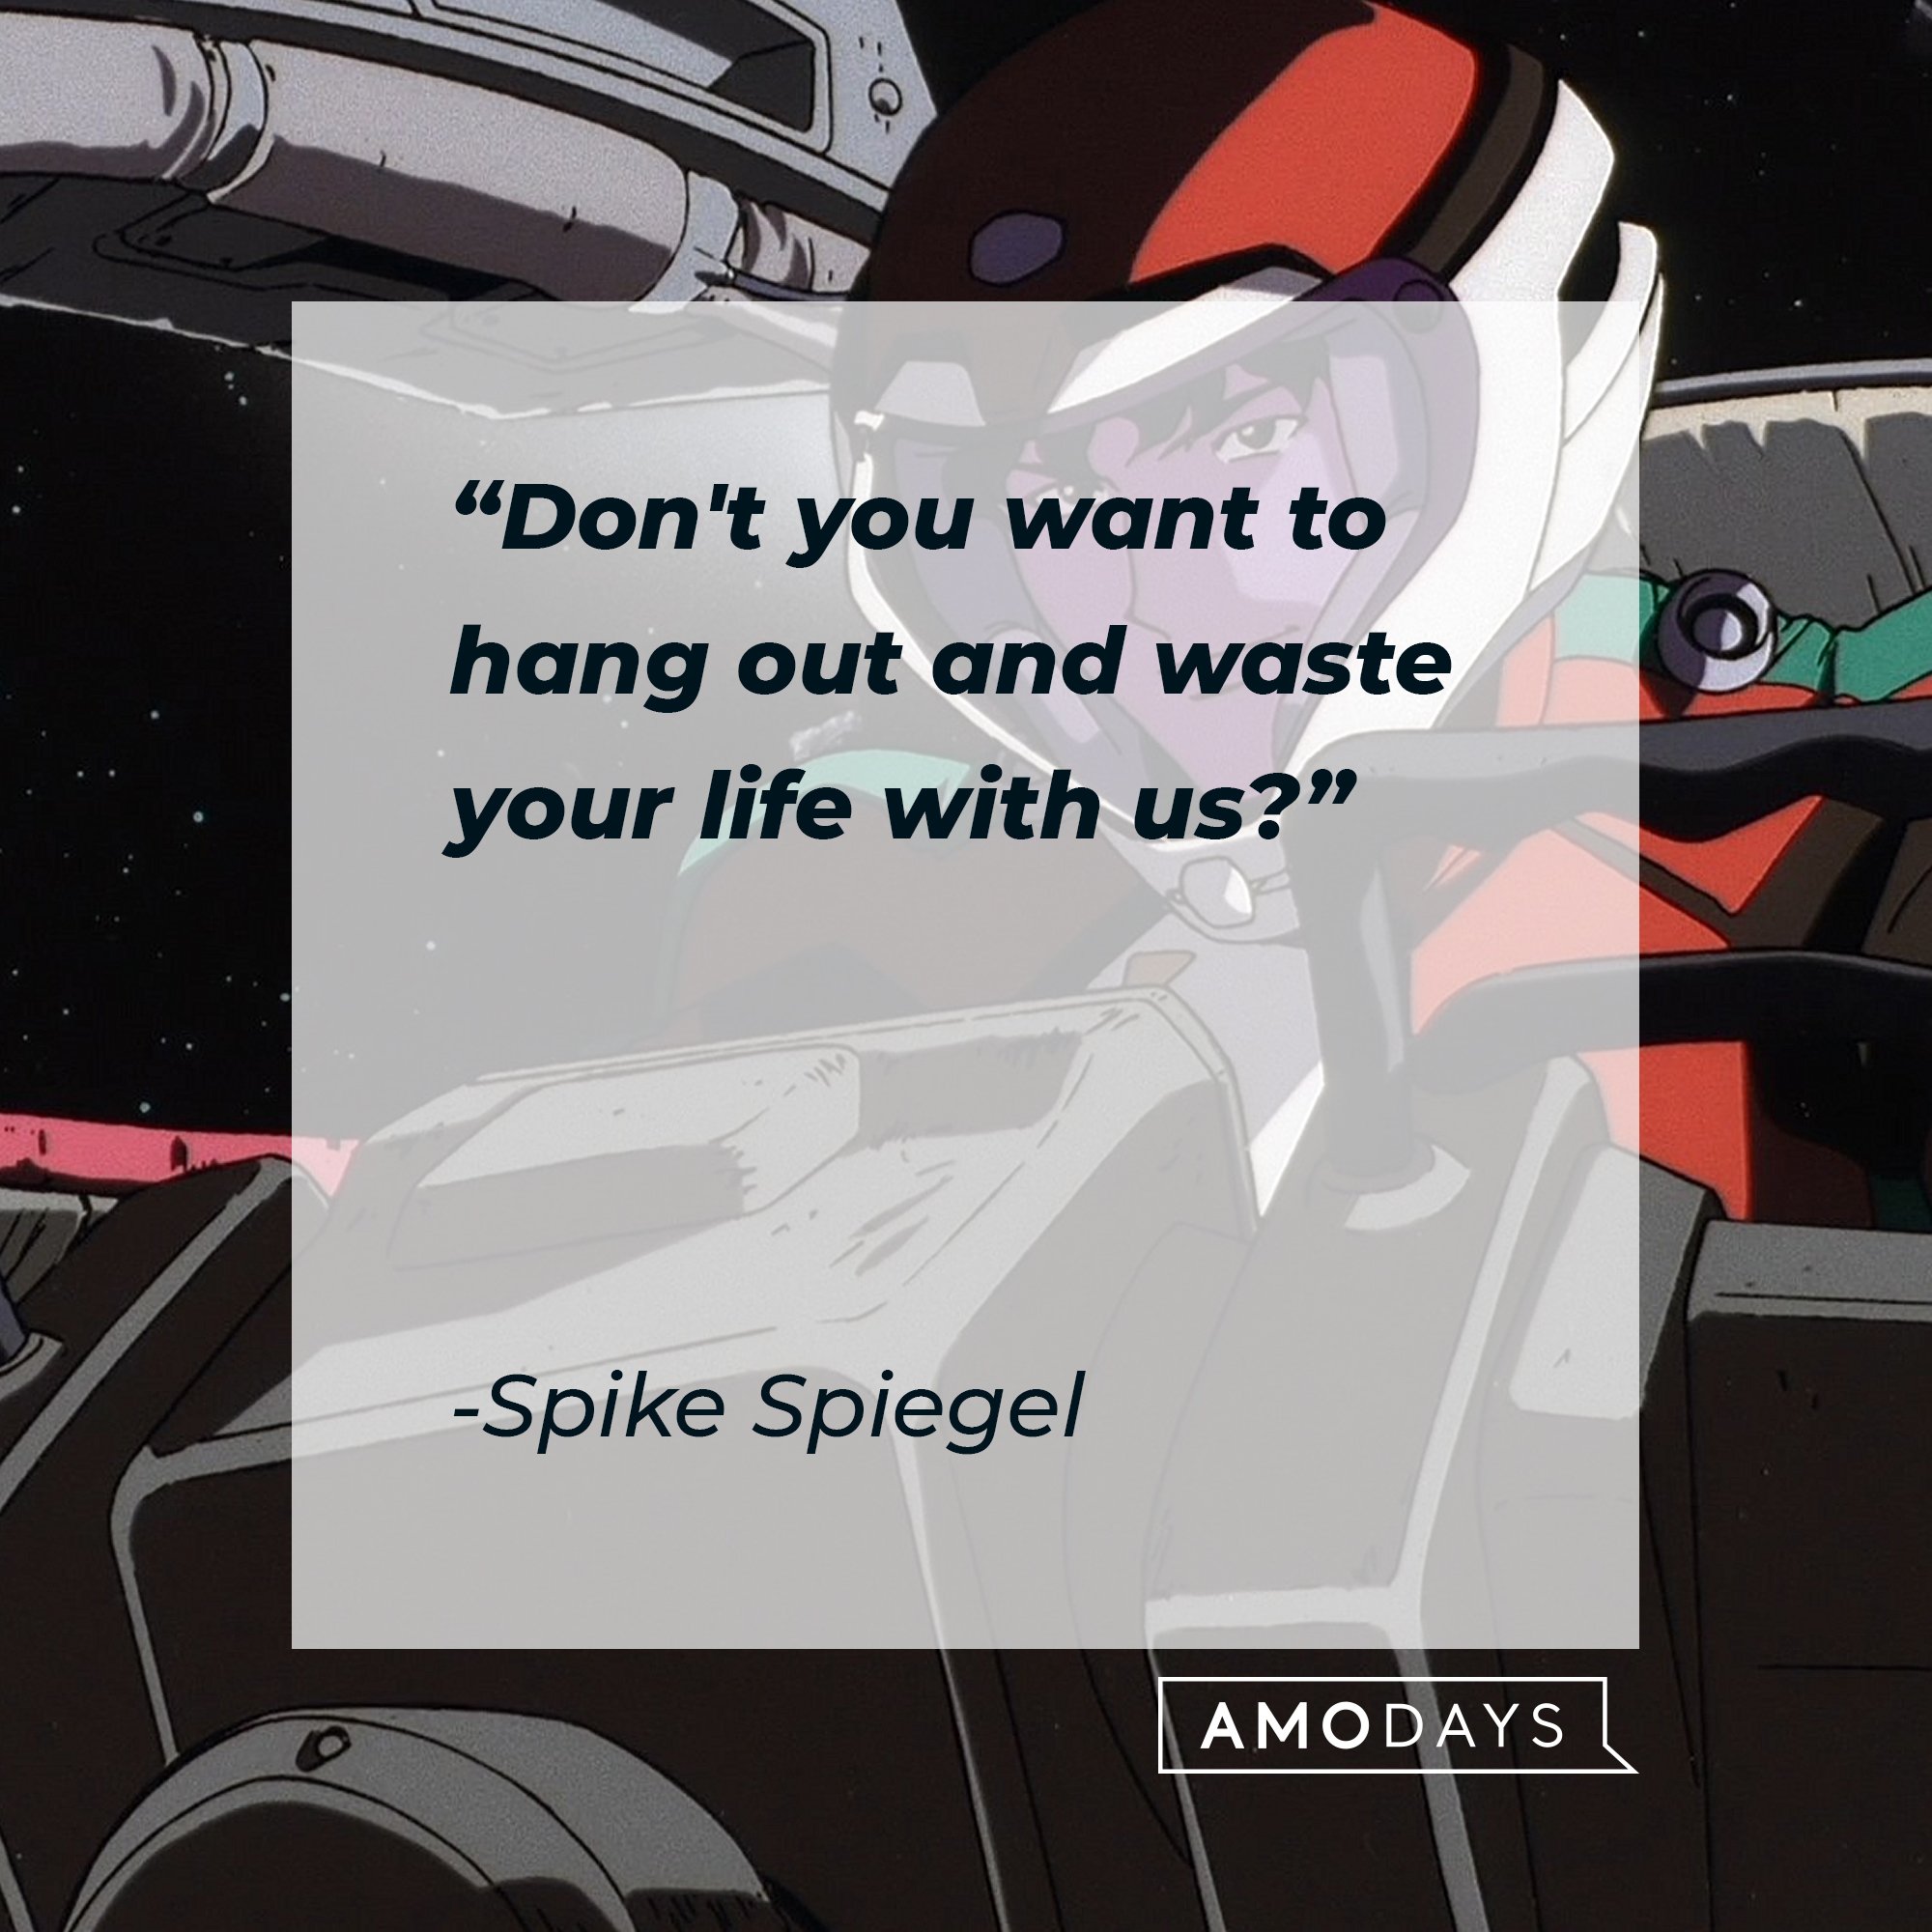 Spike Spiegel's quote: "Don't you want to hang out and waste your life with us?" | Image: AmoDays 